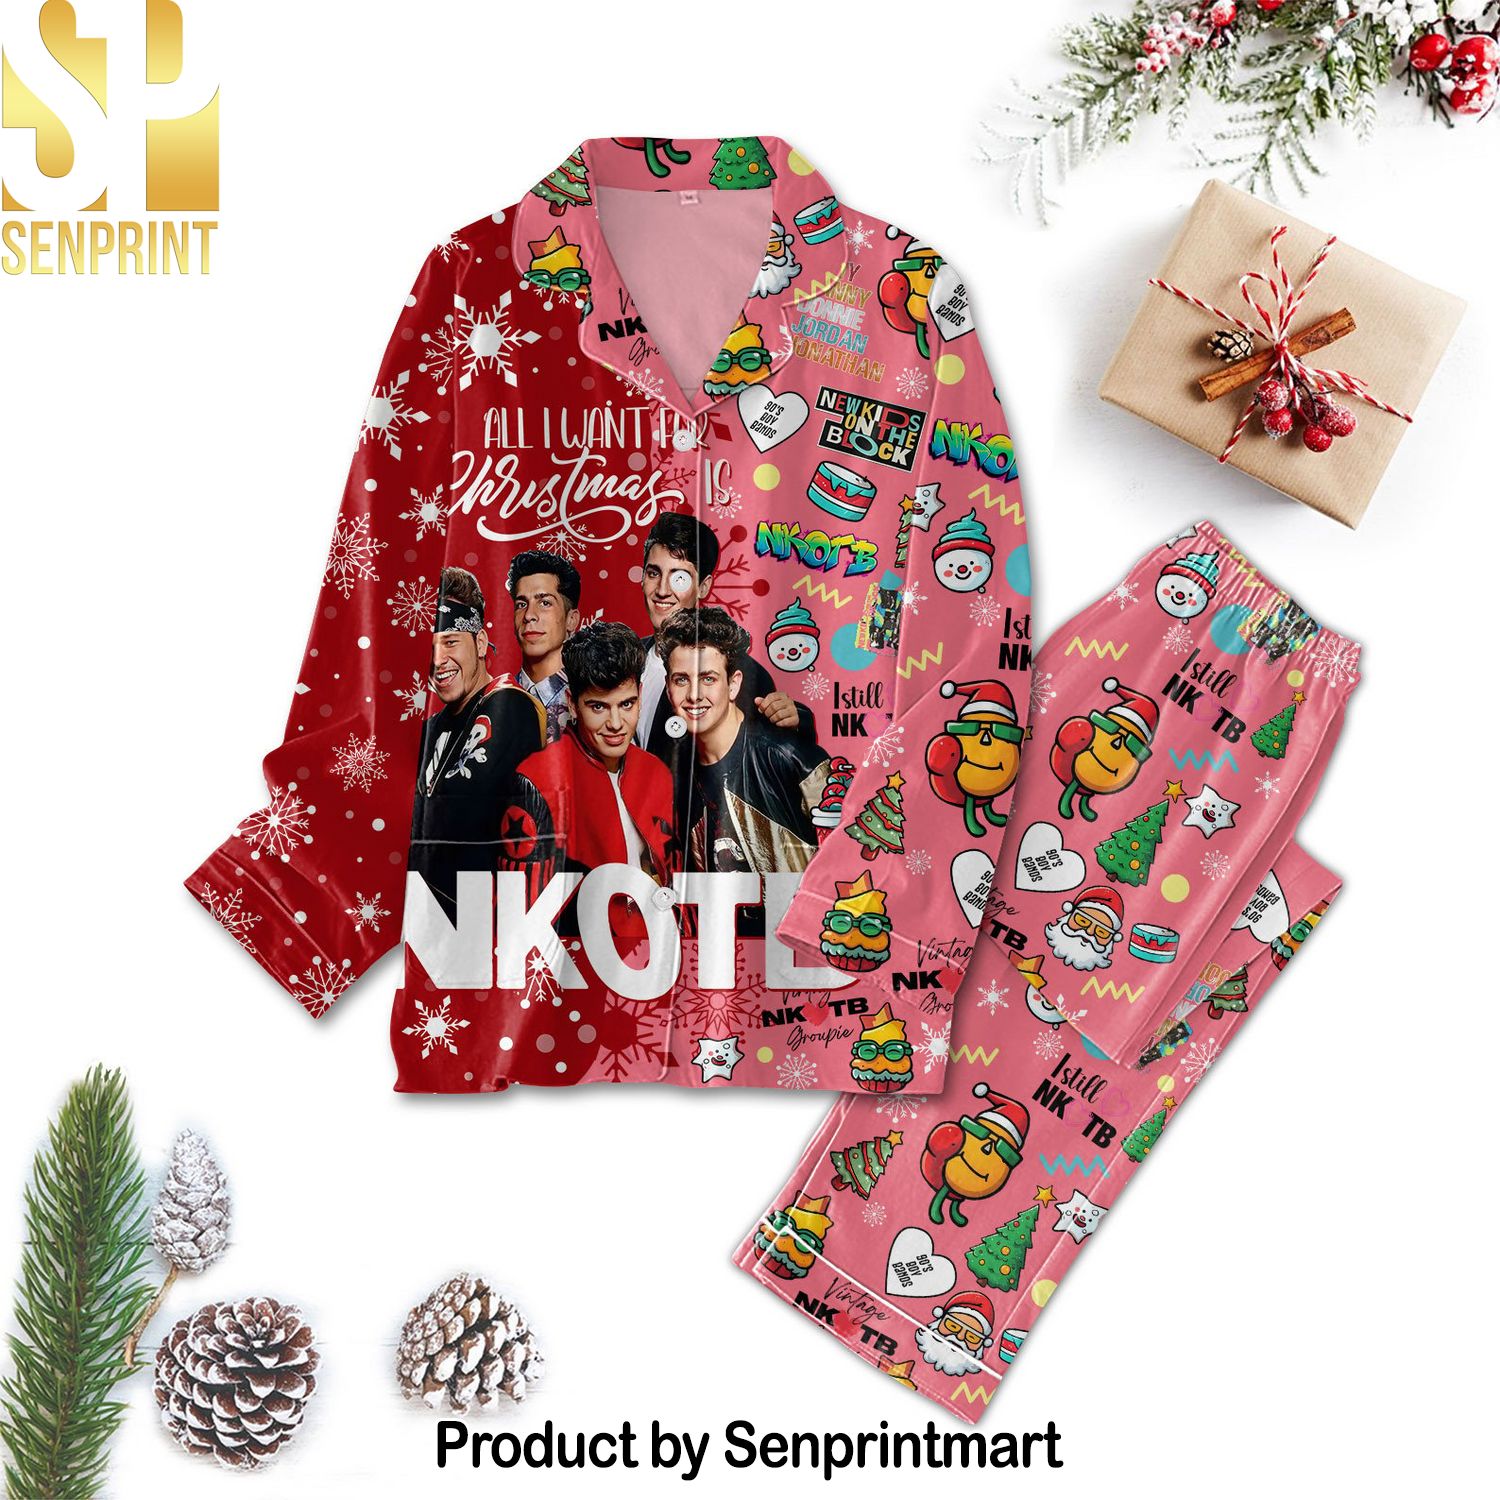 New Kids on the Block Classic Full Printed Pajama Sets